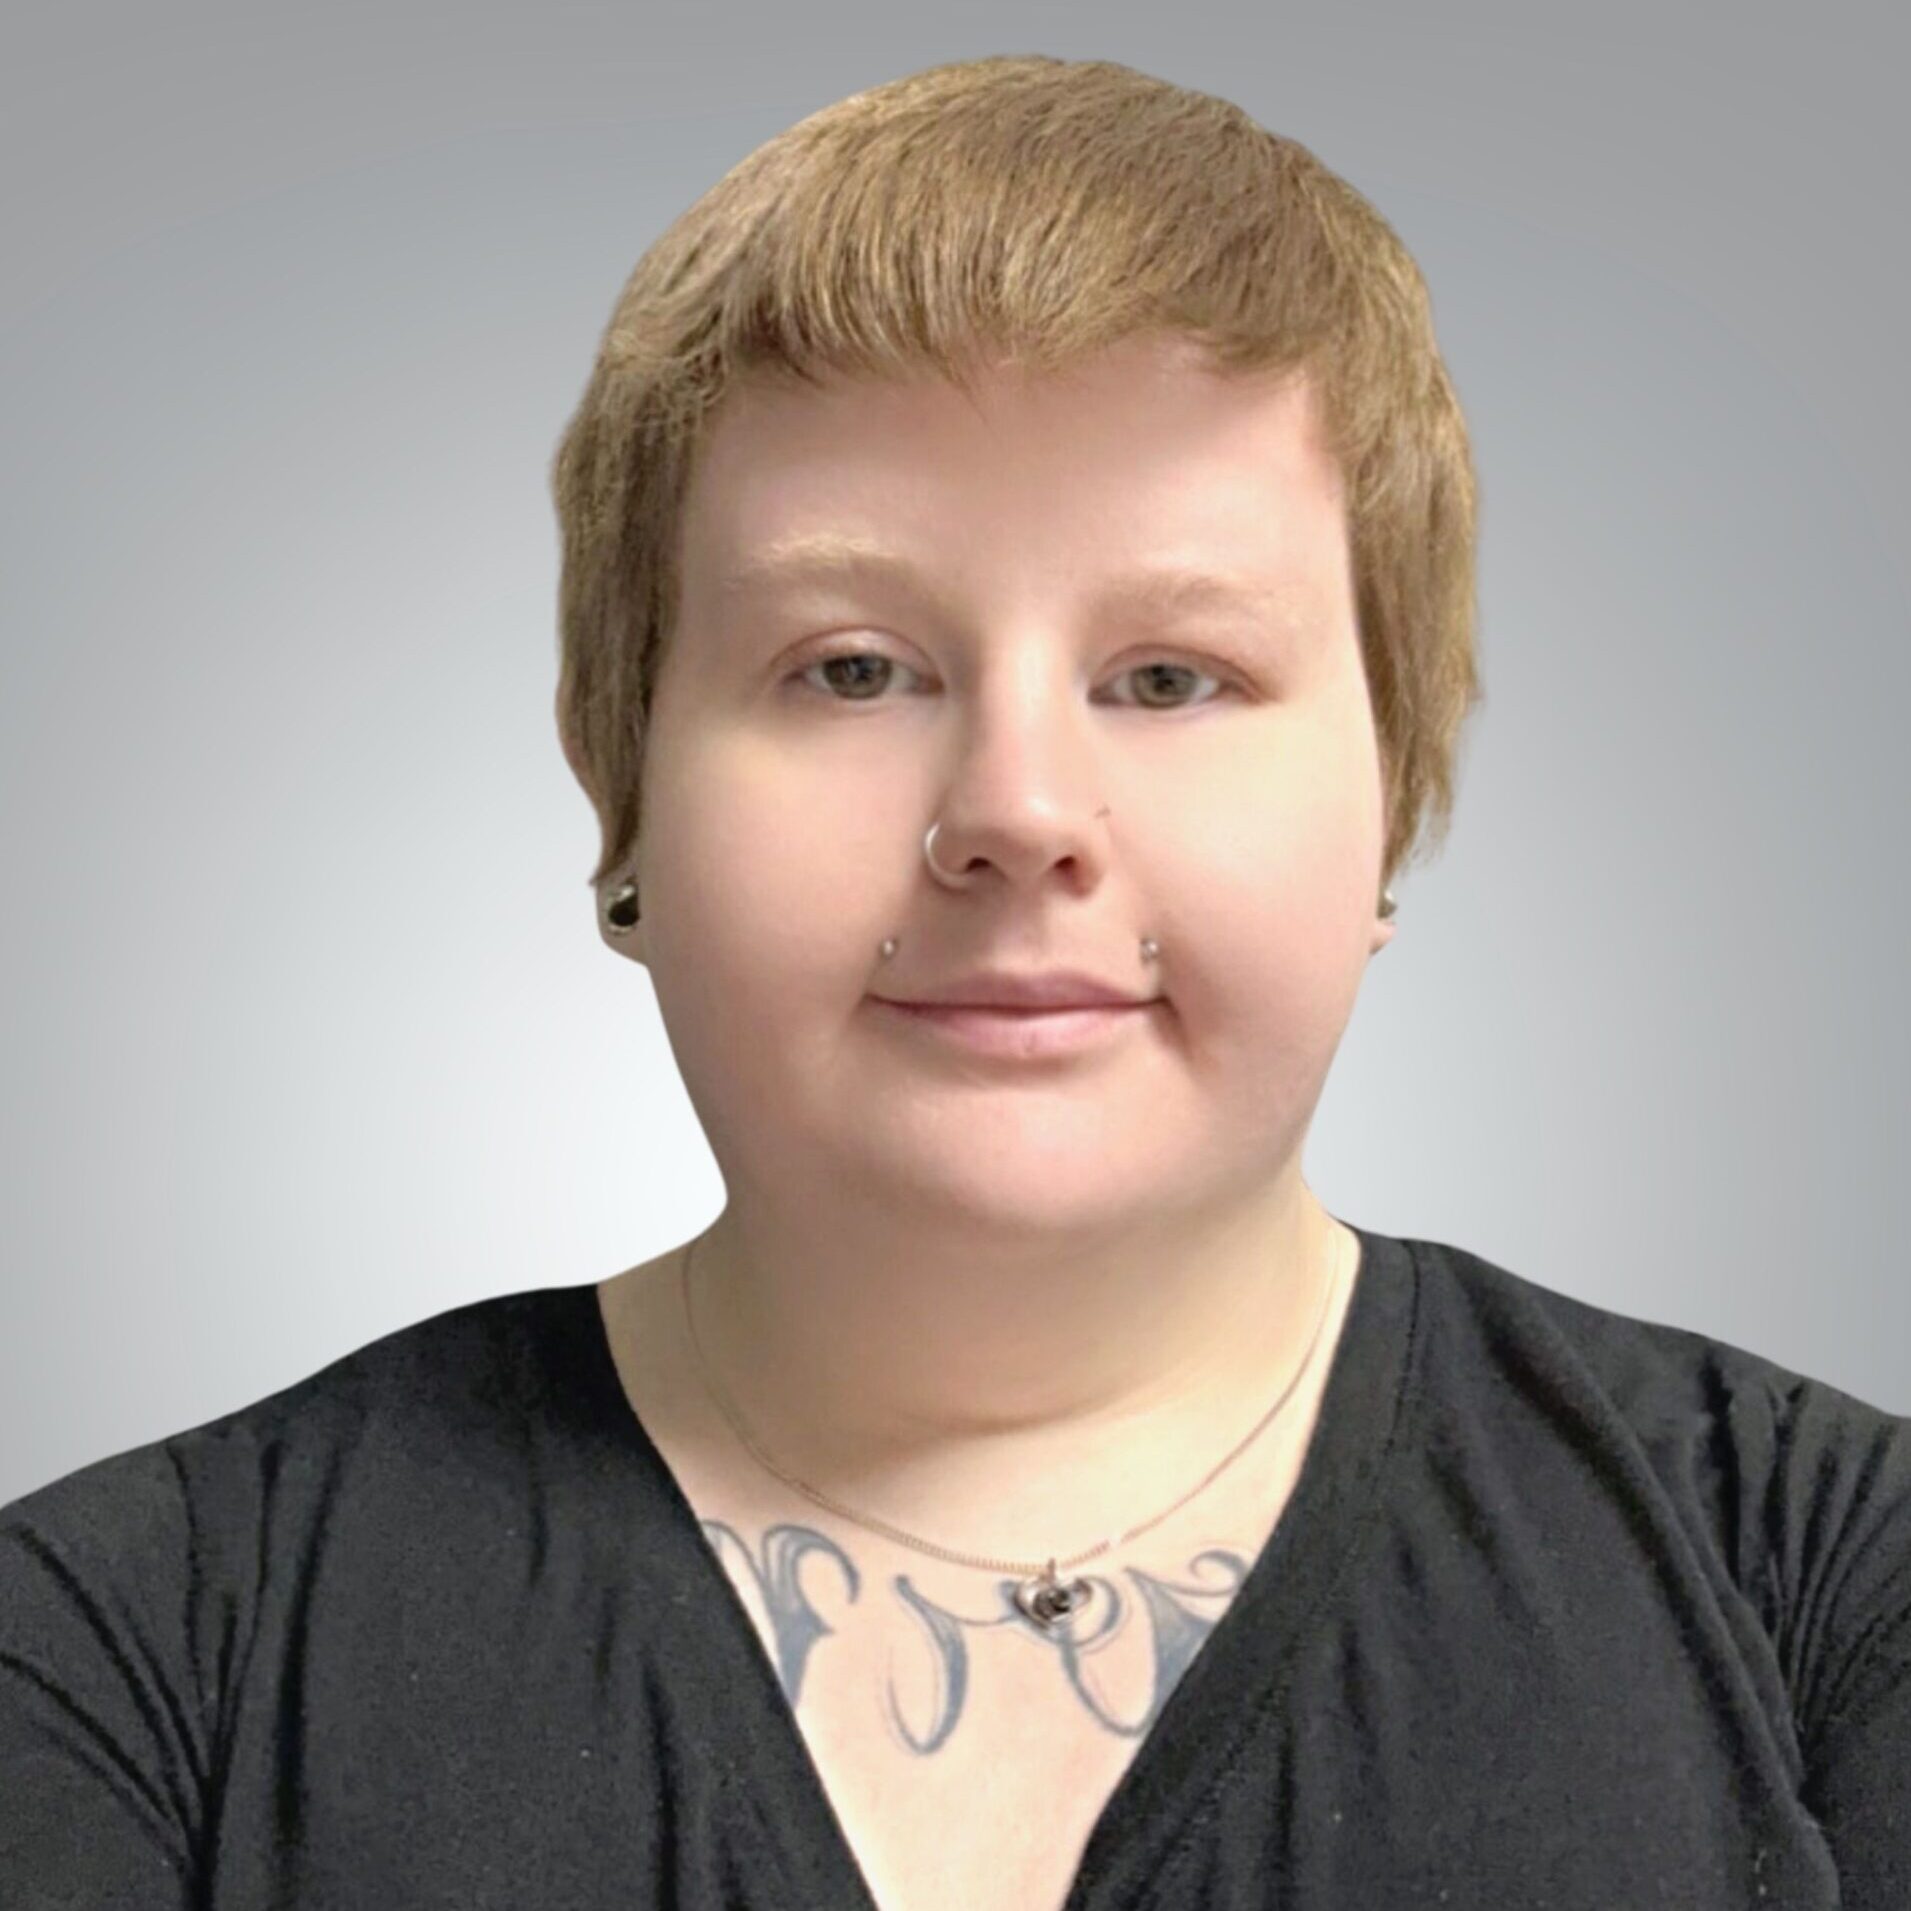 Professional headshot of a RMT and Manual Osteopath with short blonde hair, right nostril piercing, in a black V-neck top, displaying a calm and neutral expression, set against a light grey backdrop.